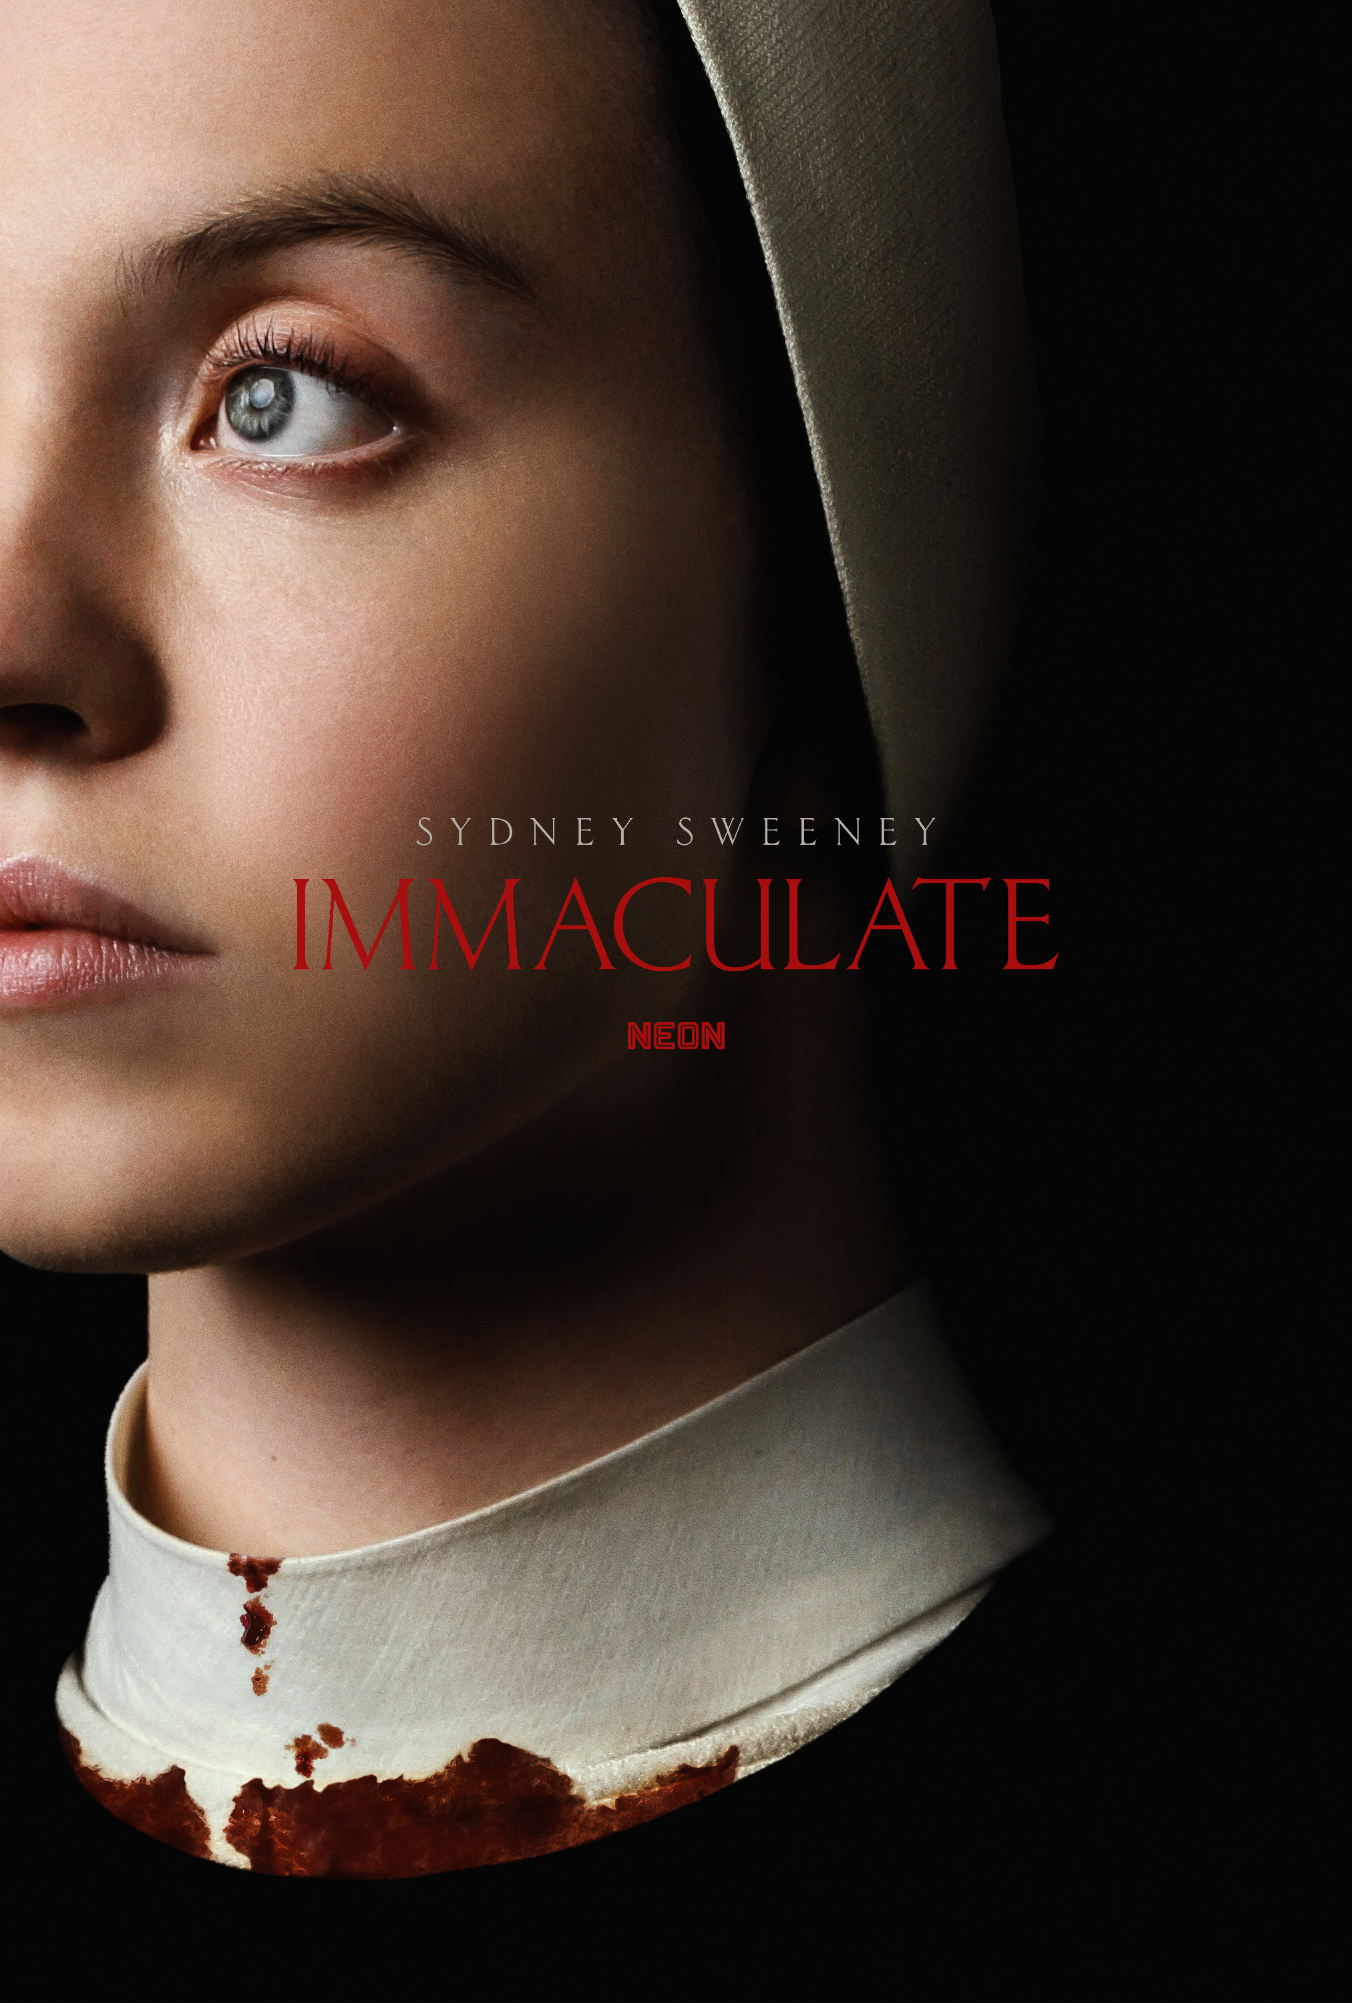 Close-up of Sydney Sweeney wearing a nun&#x27;s habit with a bloodstain on the collar, movie poster for &quot;Immaculate.&quot;